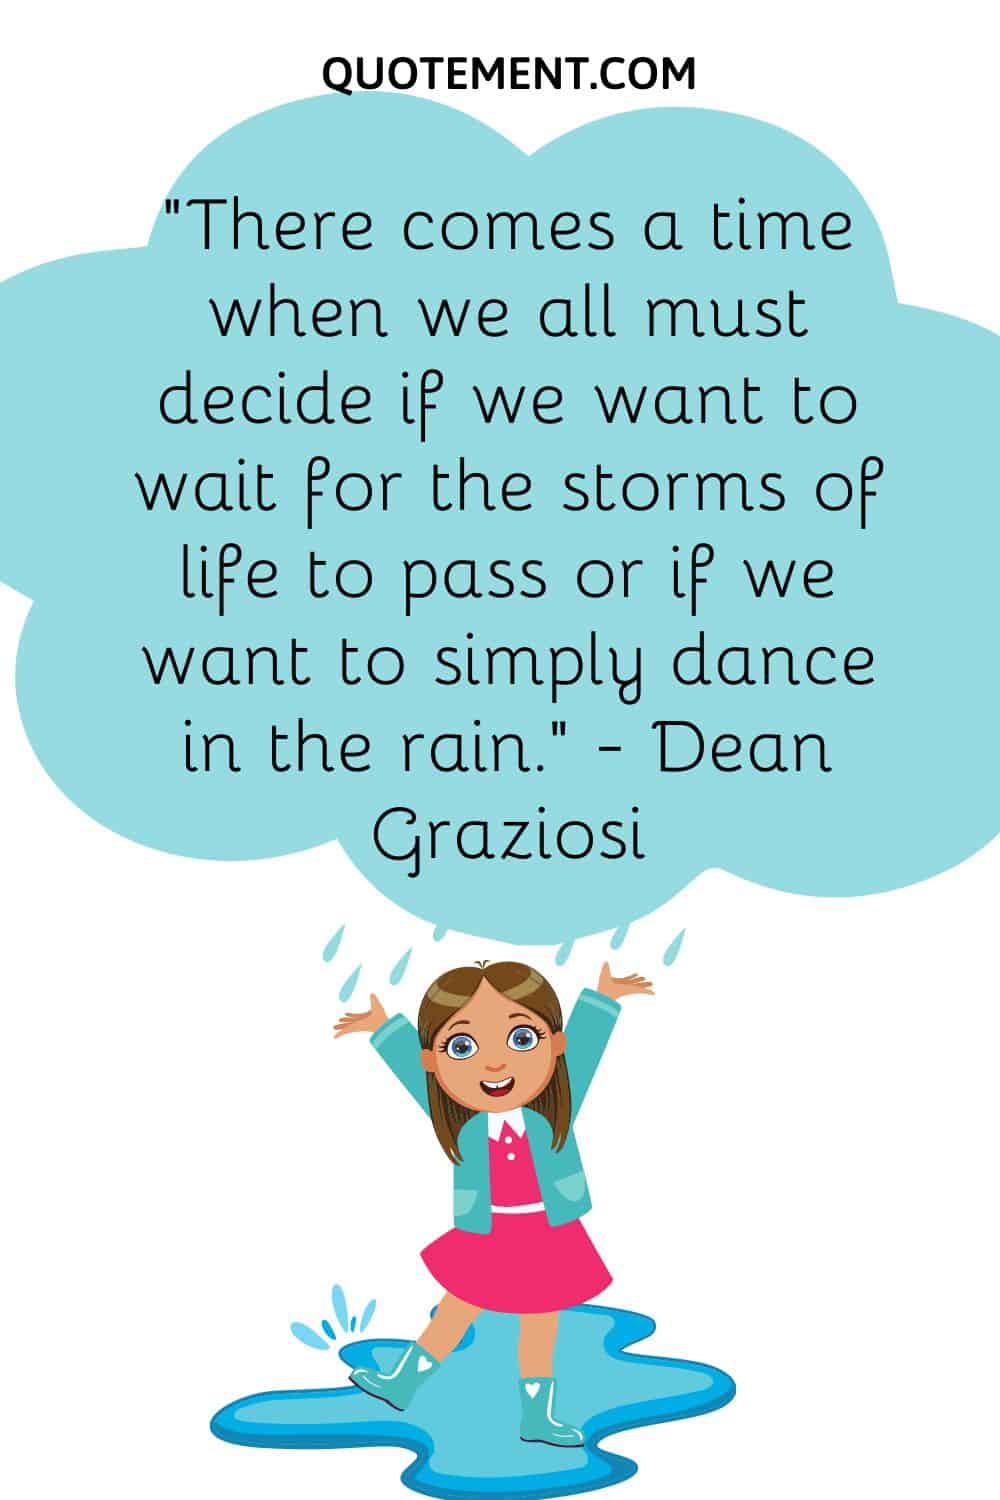 There comes a time when we all must decide if we want to wait for the storms of life to pass or if we want to simply dance in the rain